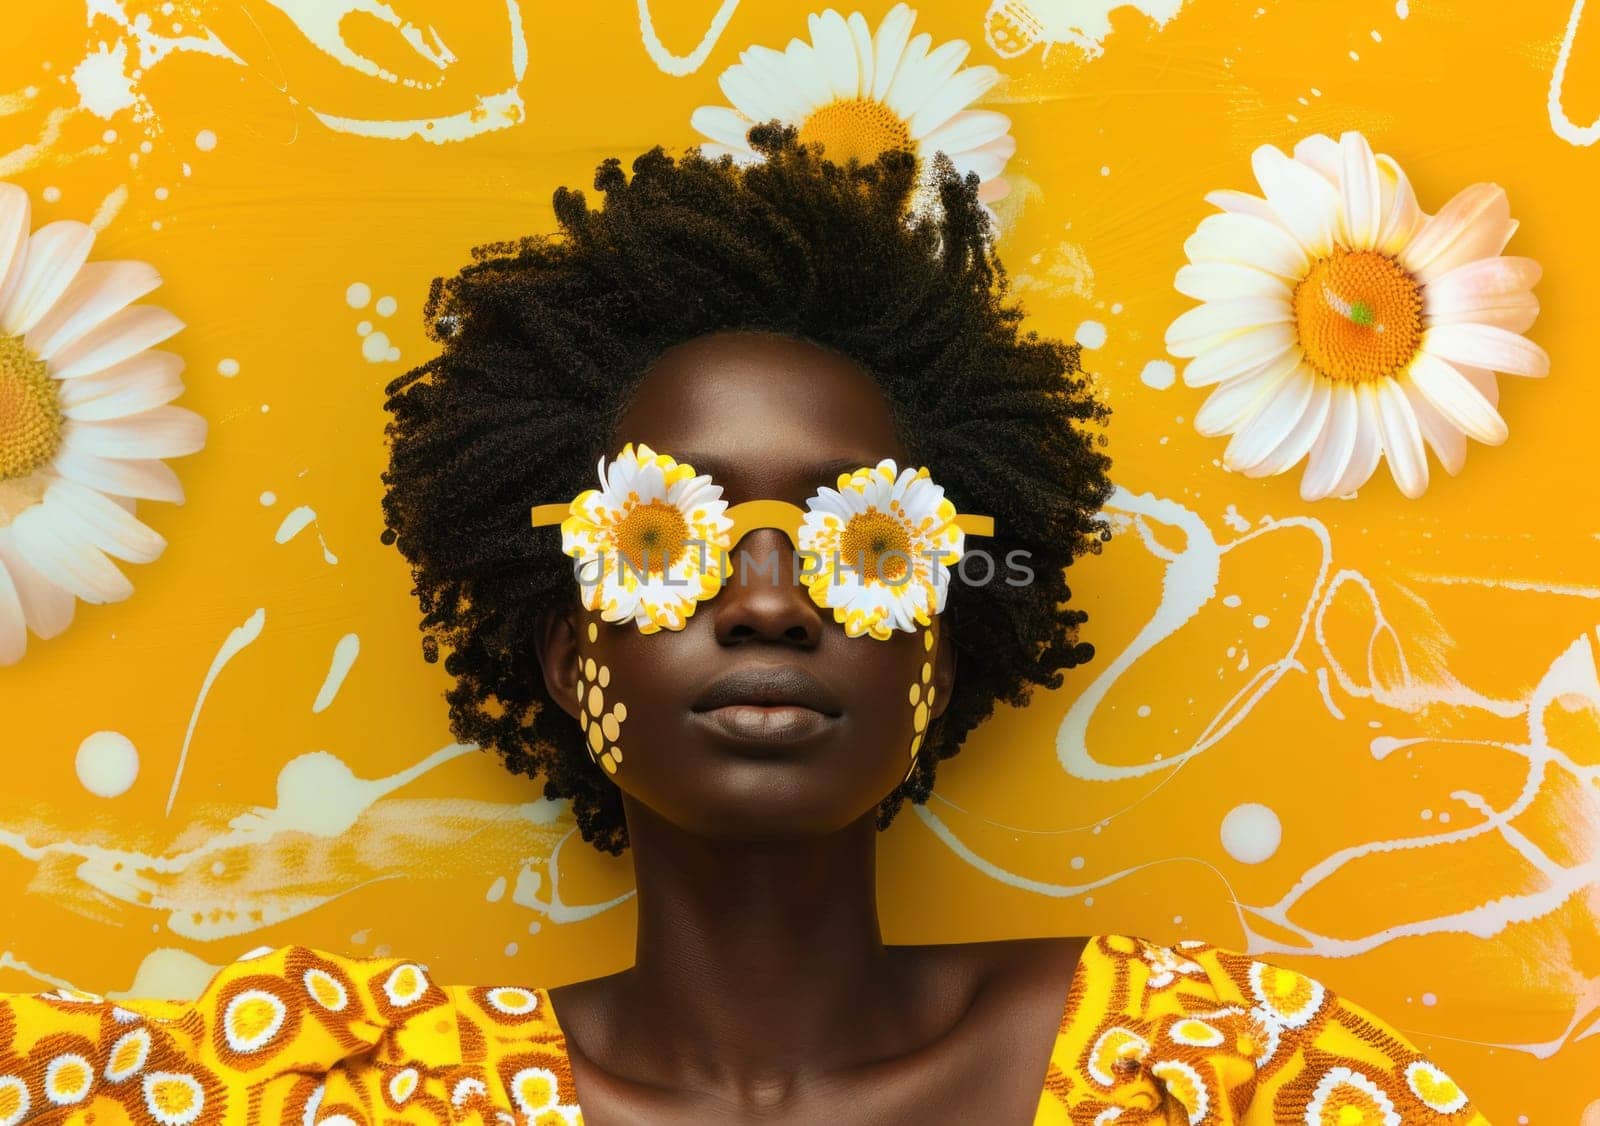 African woman with flowers in hair and sunglasses in front of yellow background beauty and fashion portrait trip concept